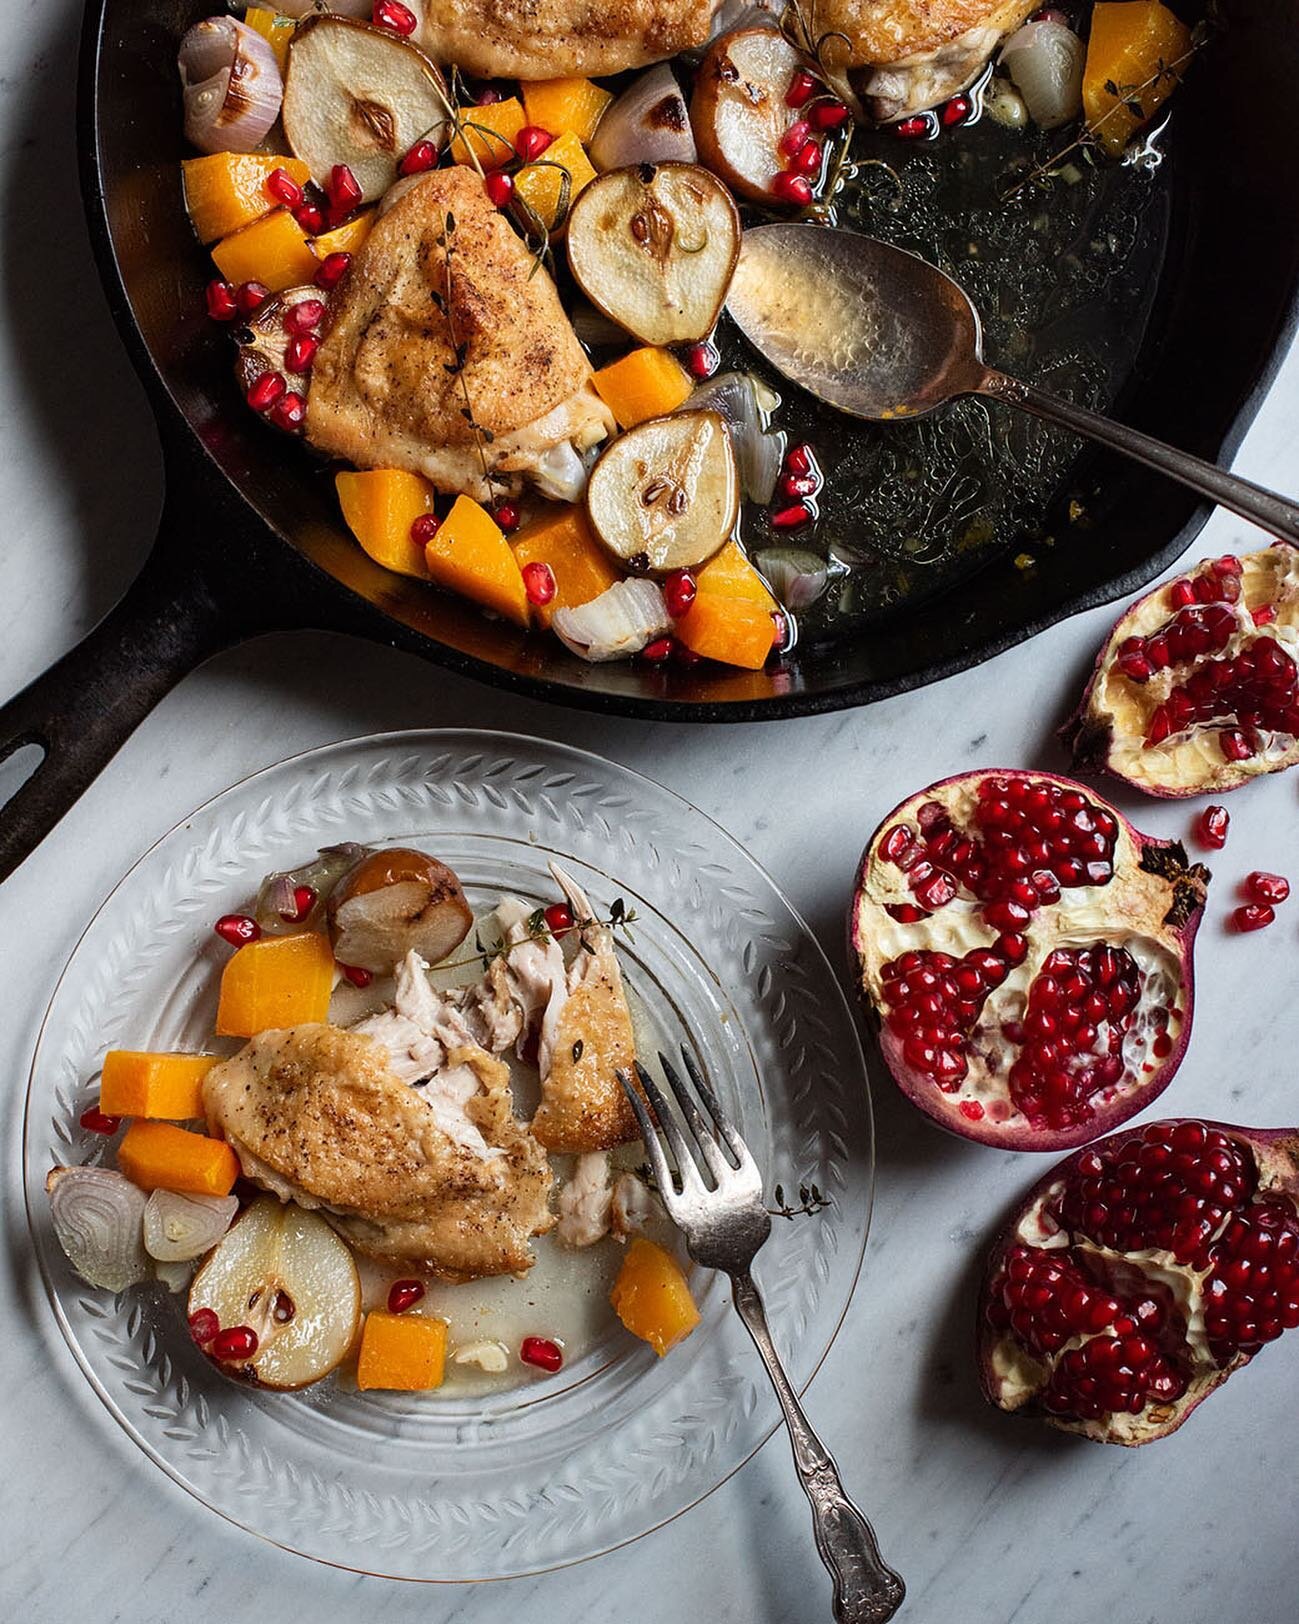 A cozy recipe to beat this chilly autumn weekend: one-skillet roasted chicken thighs with butternut, pears, &amp; pomegranate seeds. Up on the blog now! Link in bio

#foodstyling #foodstylist #foodphotography #foodphotographer #autumnrecipe #fallreci